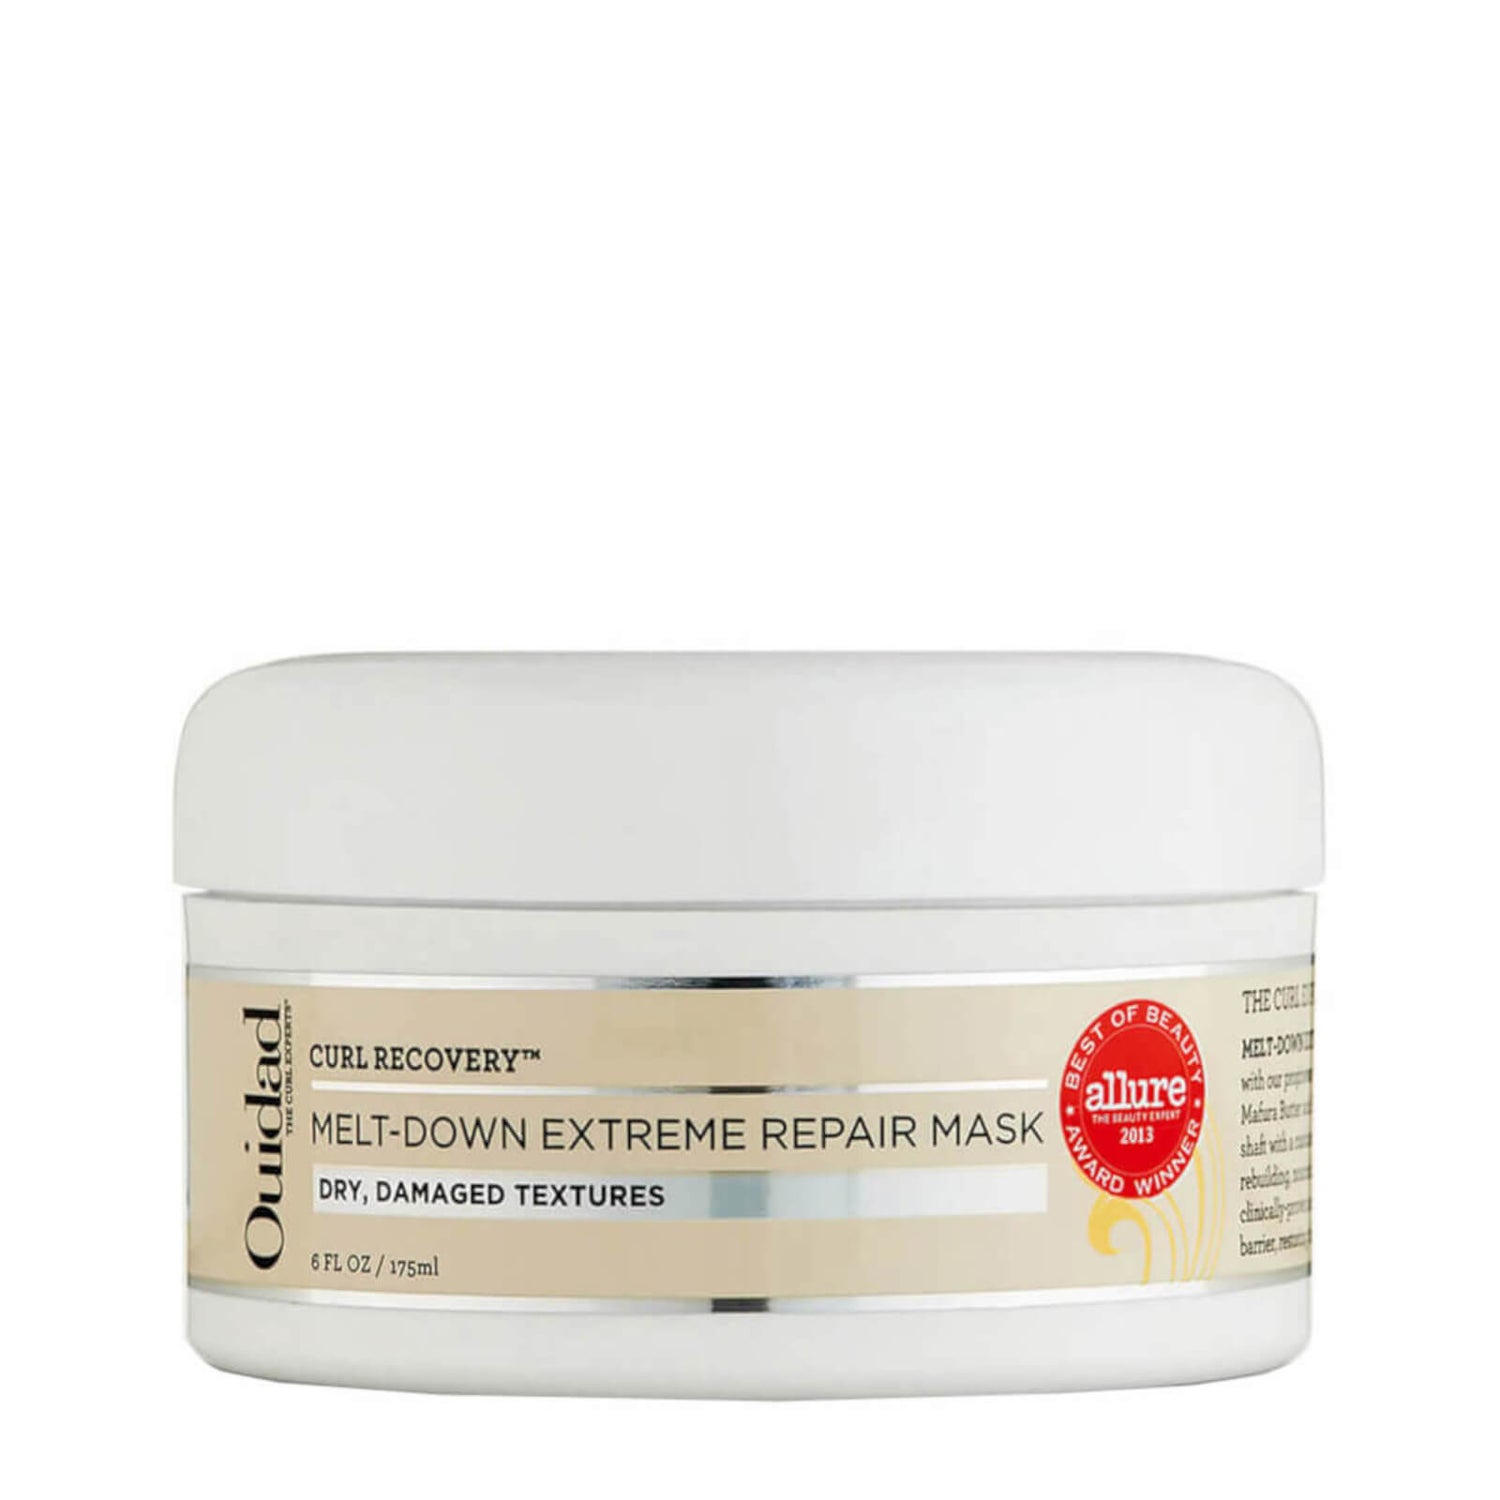 Ouidad Curl Recovery Melt-Down Extreme Repair Mask (6 fl. oz.)